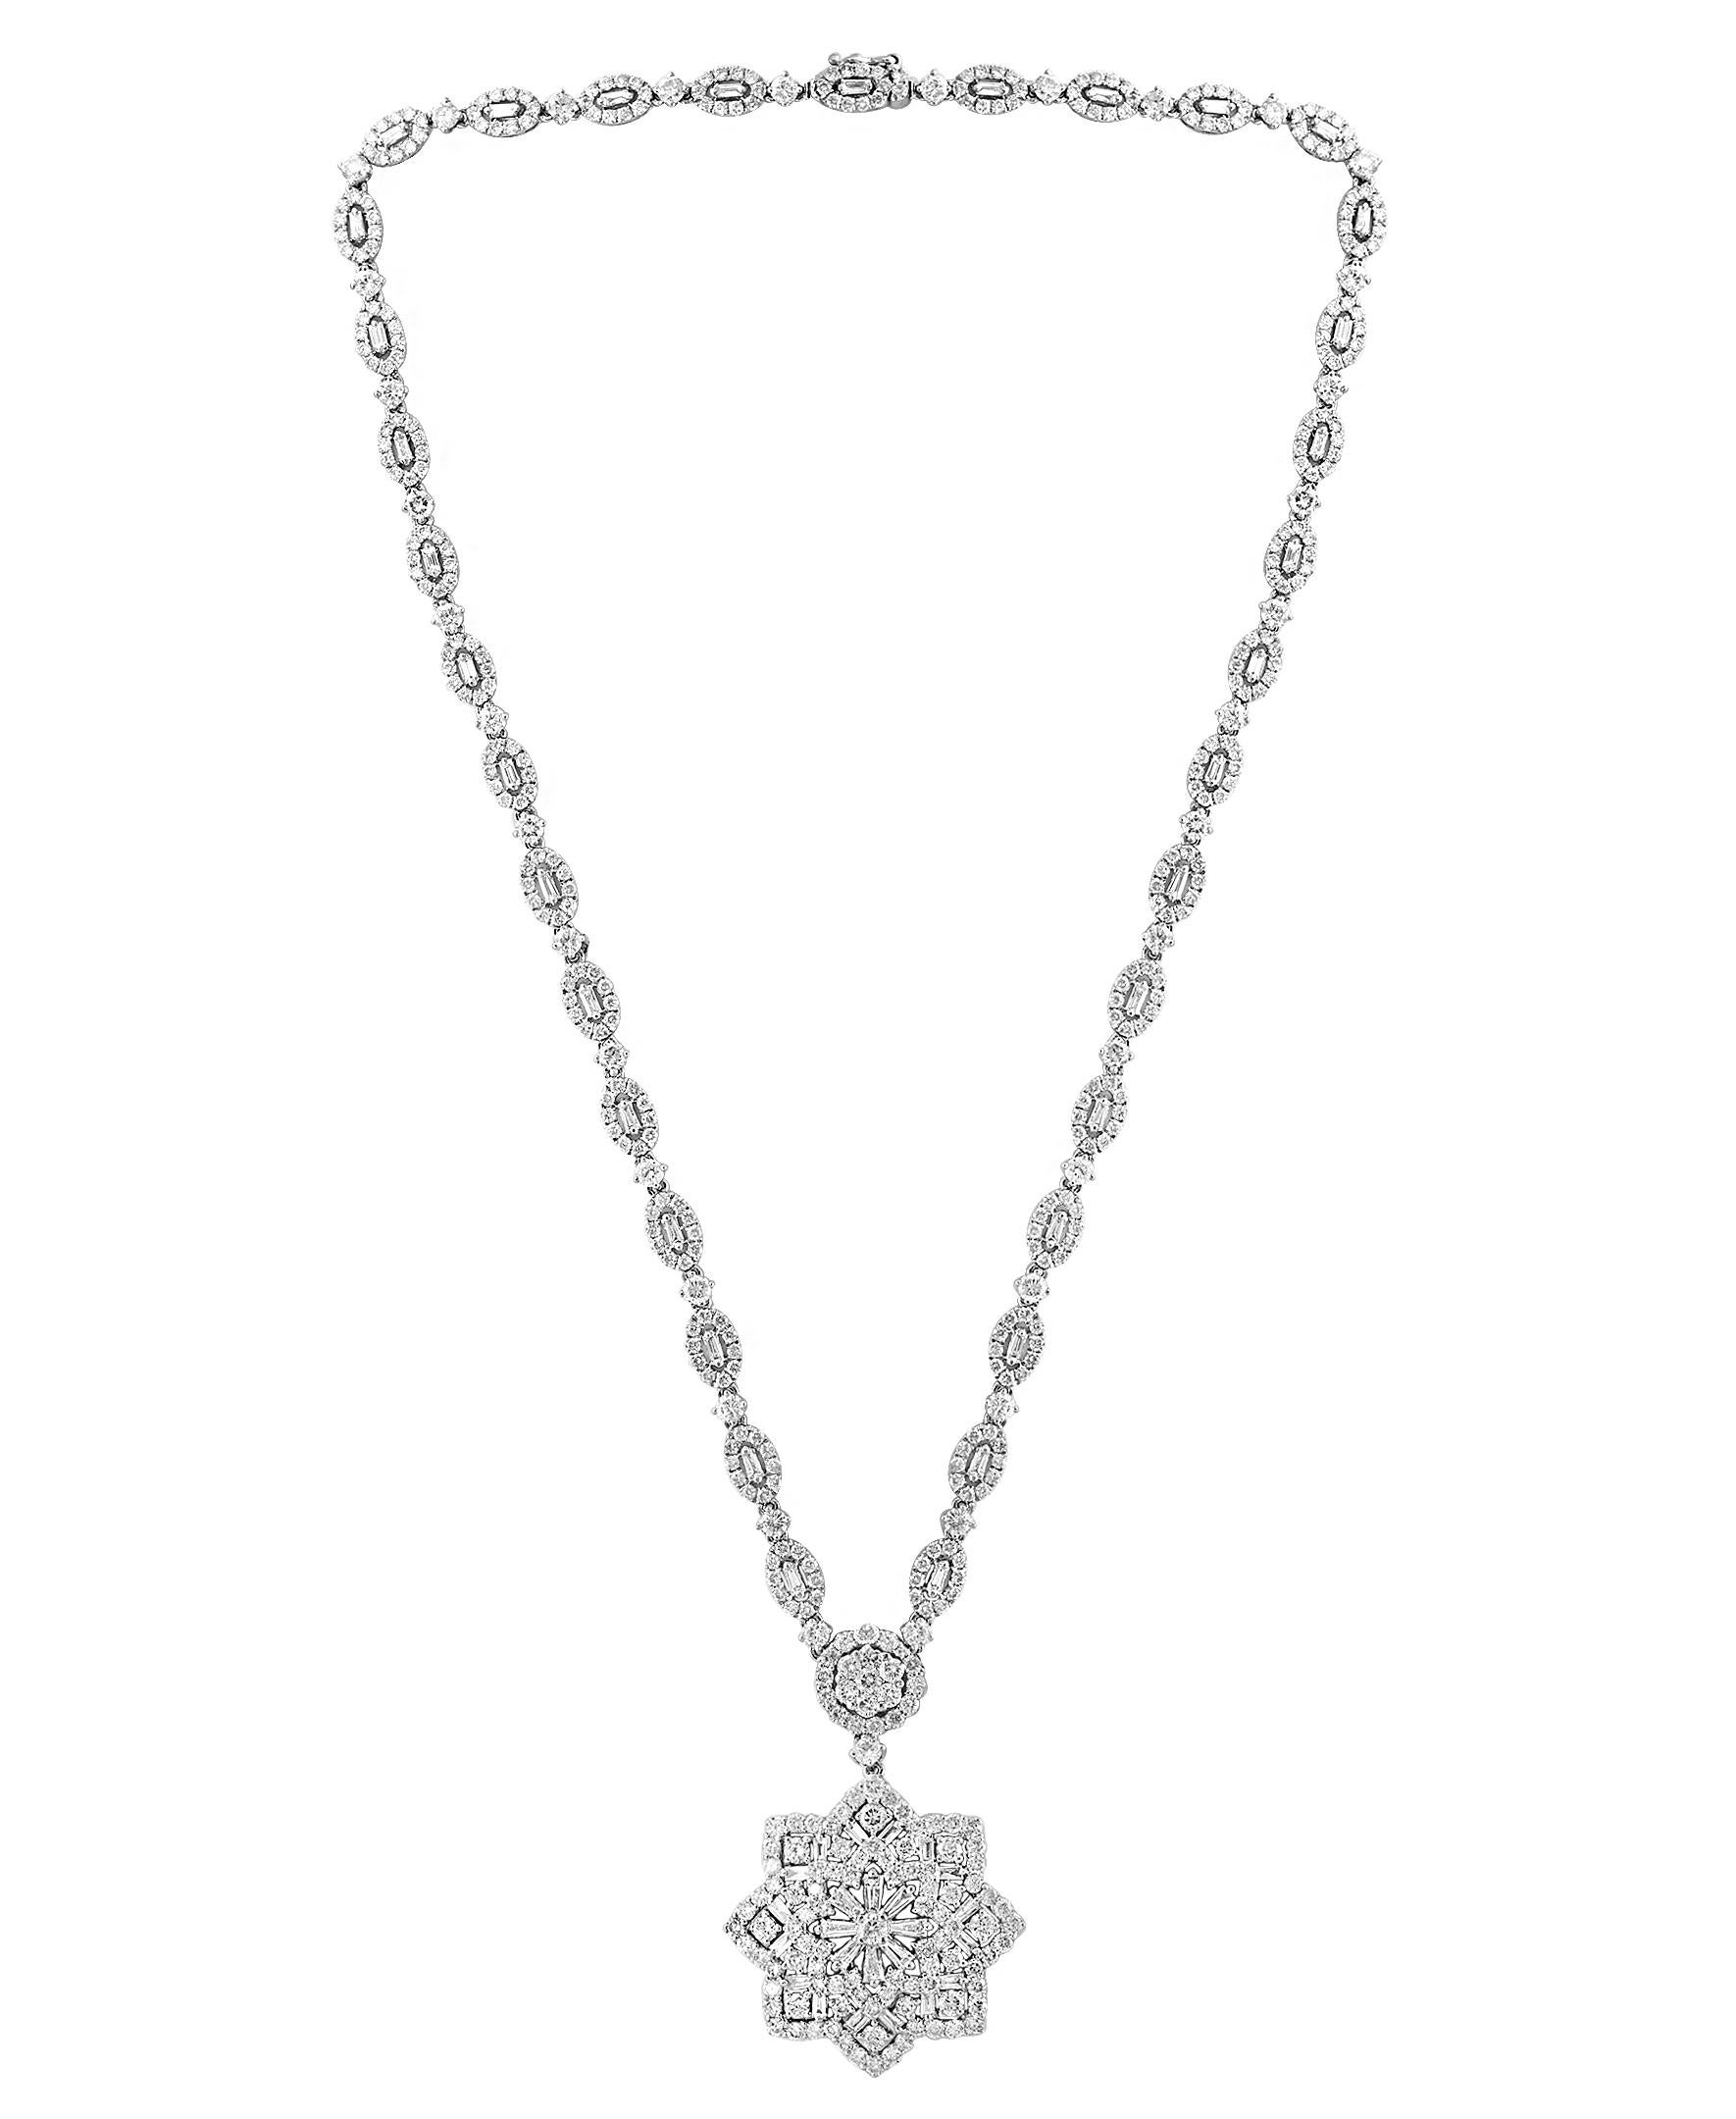 
10.93 carats of VS 2 to SI1 quality of Diamonds all mounted in 18 karat White  gold. Weight of the necklace is 19 Grams . The pendulum of necklace is made in a flower shape with round and Buggets Diamonds.
Very affordable price for this particular